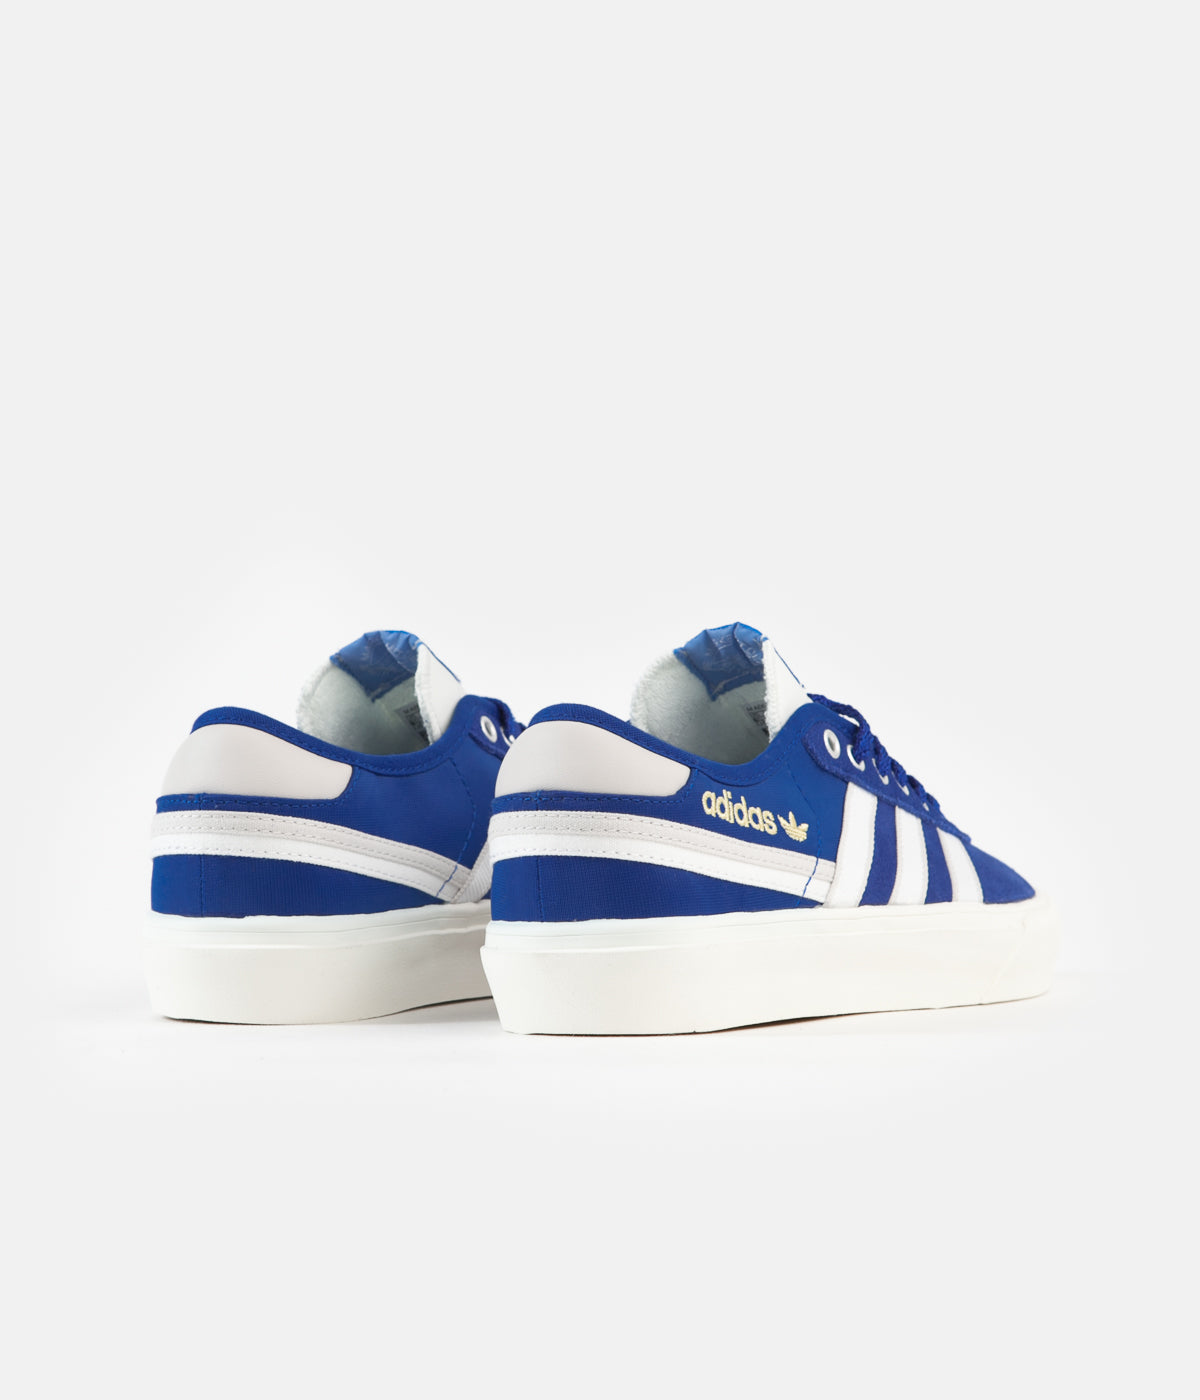 adidas return policy used shoes